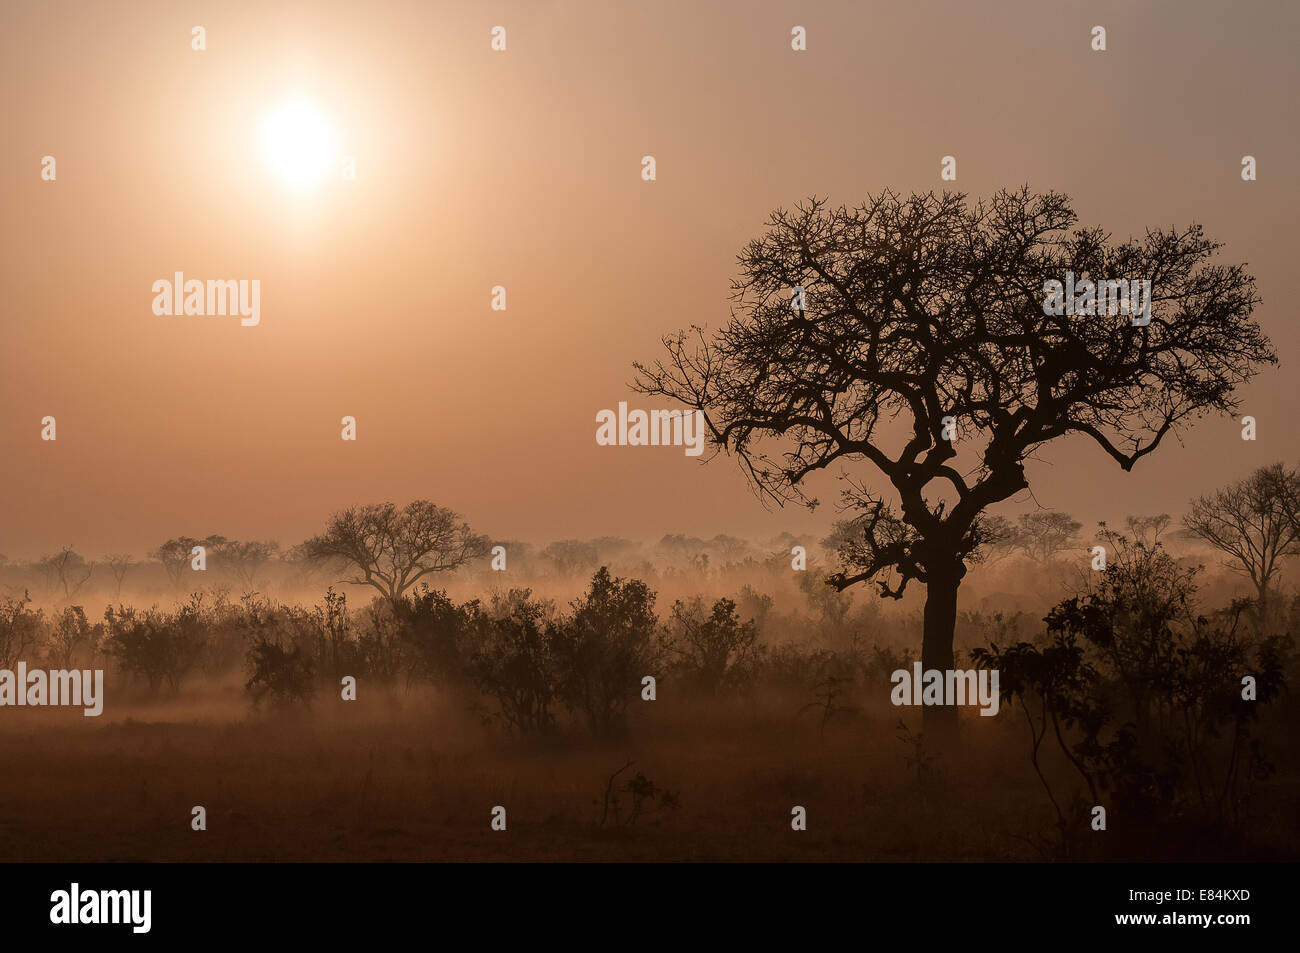 Sunrise over African scrub taken during winter months with early mist evaporating, Sabi Sands Private Game Reserve. Stock Photo